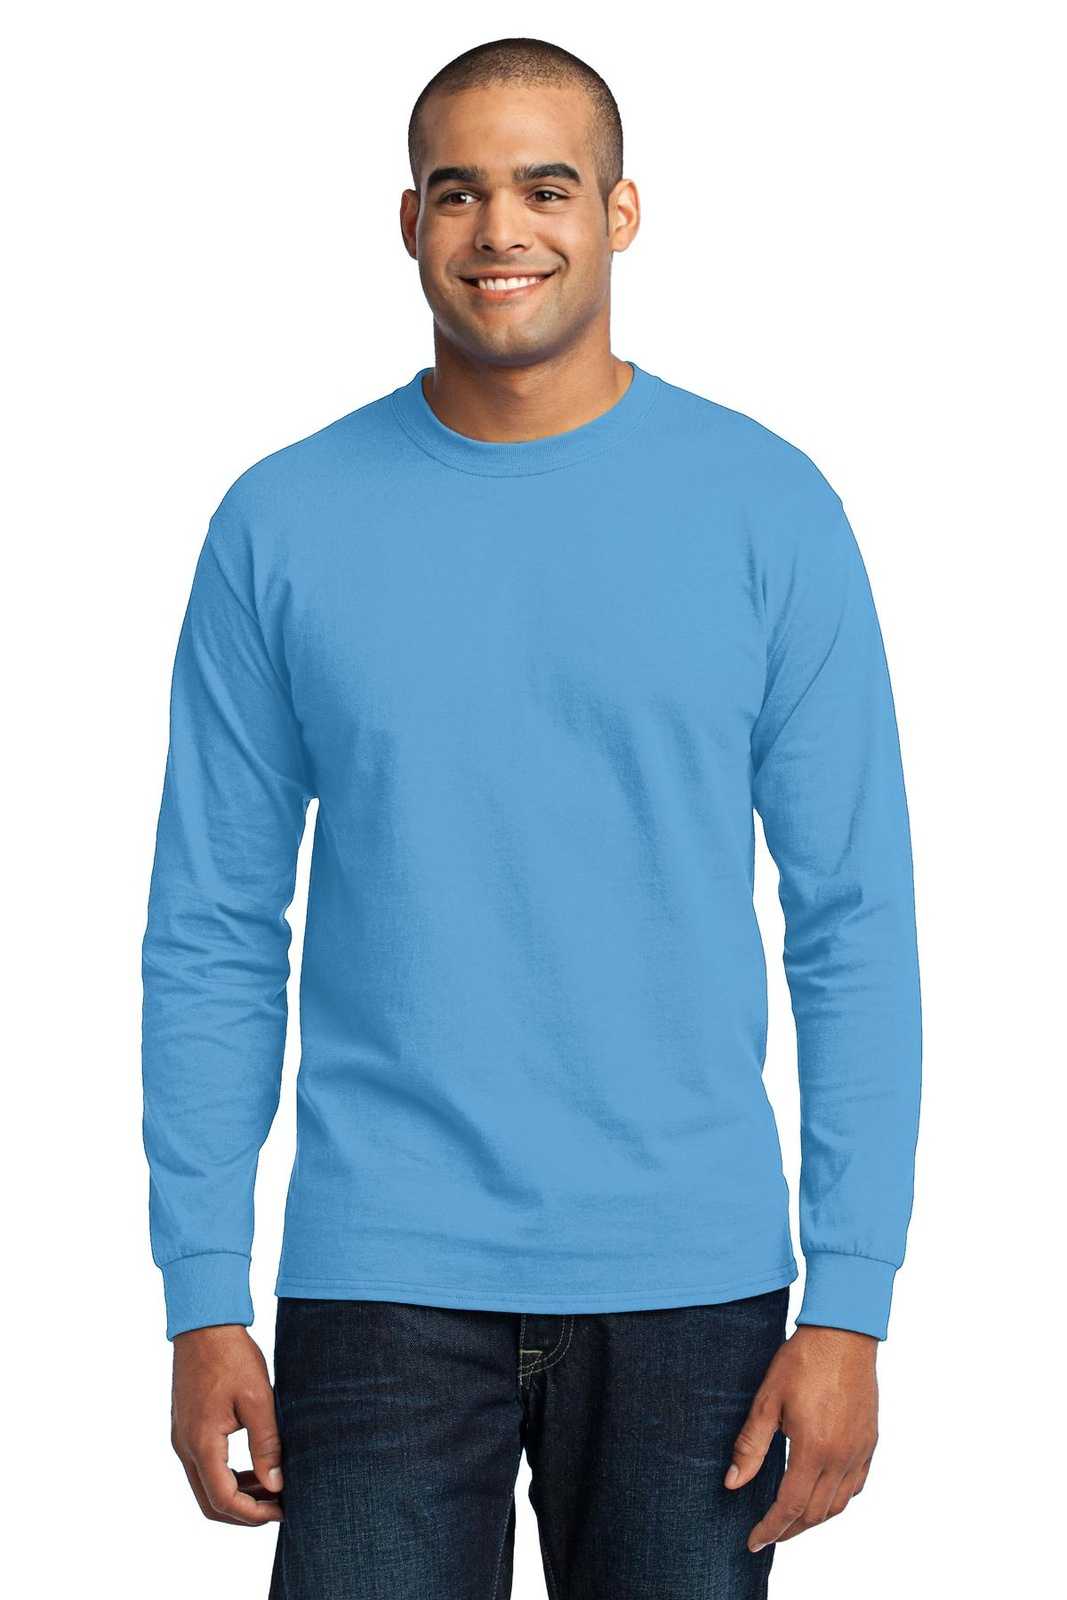 Port & Company PC55LST Tall Long Sleeve Core Blend Tee - Aquatic Blue - HIT a Double - 1